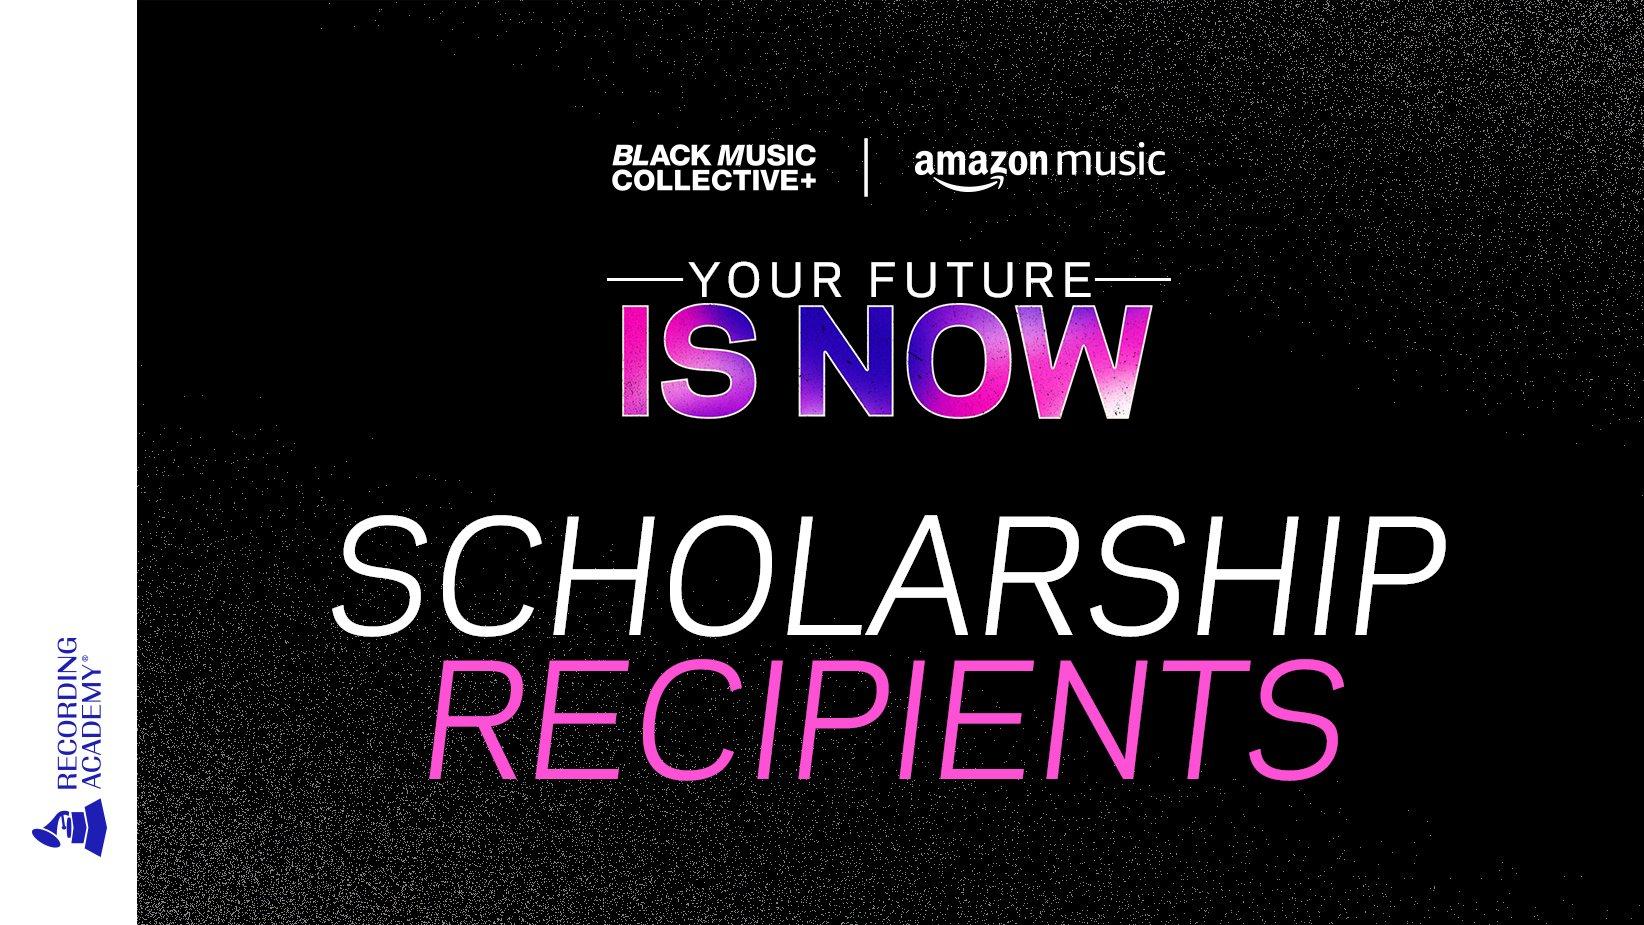 Graphic of the Recording Academy's Black Music Collective and Amazon Music "Your Future Is Now" program announcing the 2022 scholarship recipients